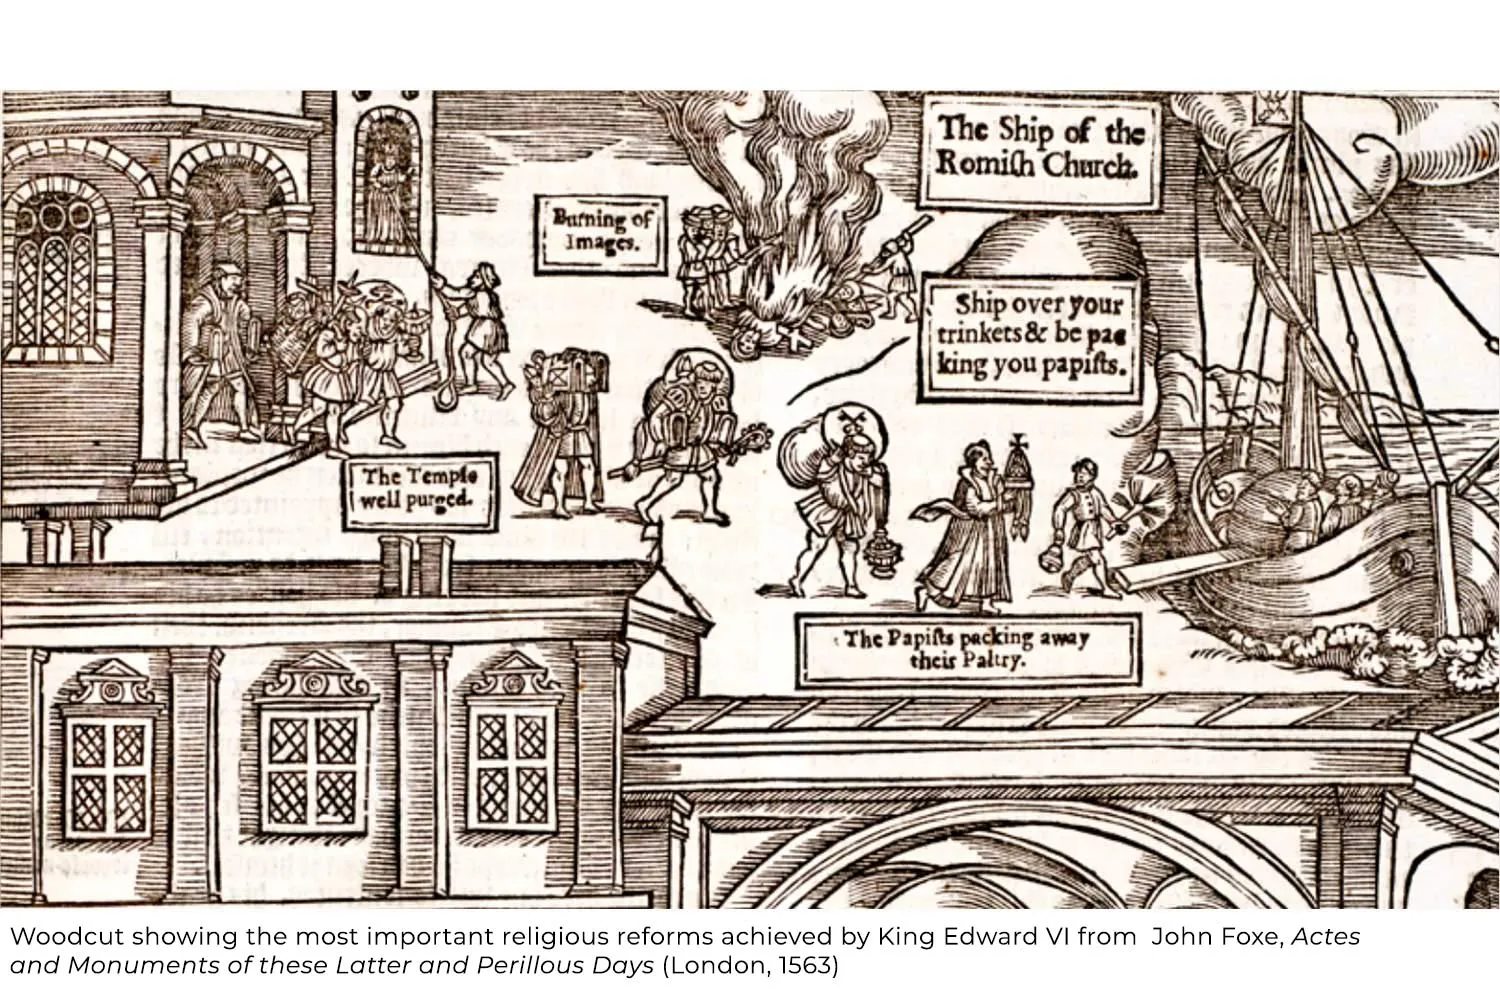 Woodcut showing the most important religious reforms achieved by King Edward VI from  John Foxe, Actes and Monuments of these Latter and Perillous Days (London, 1563)